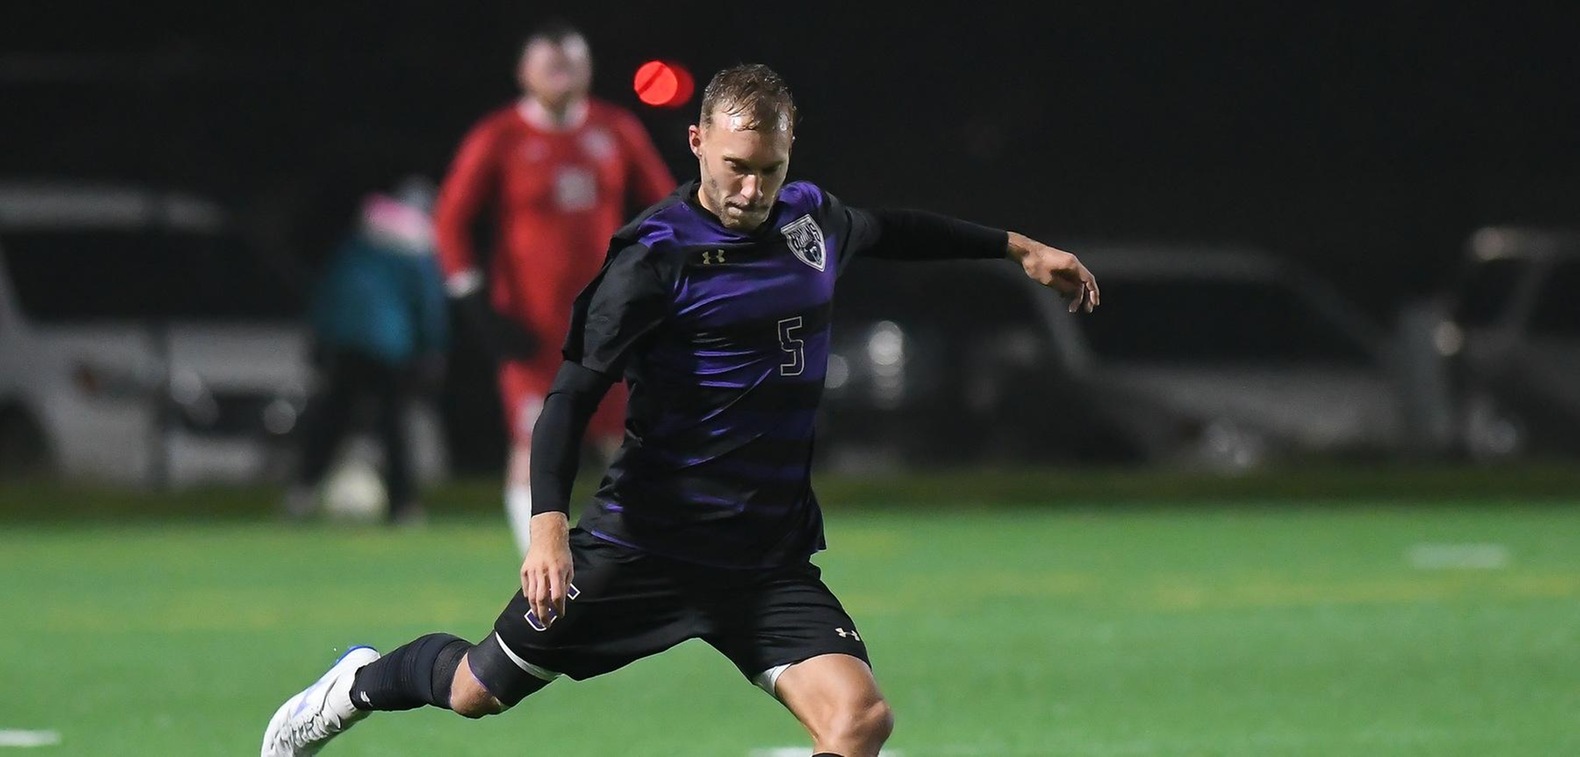 Toby Millward scored his 13th goal on a 24th minute PK as BU took a 1-1 draw on the road at McPherson.